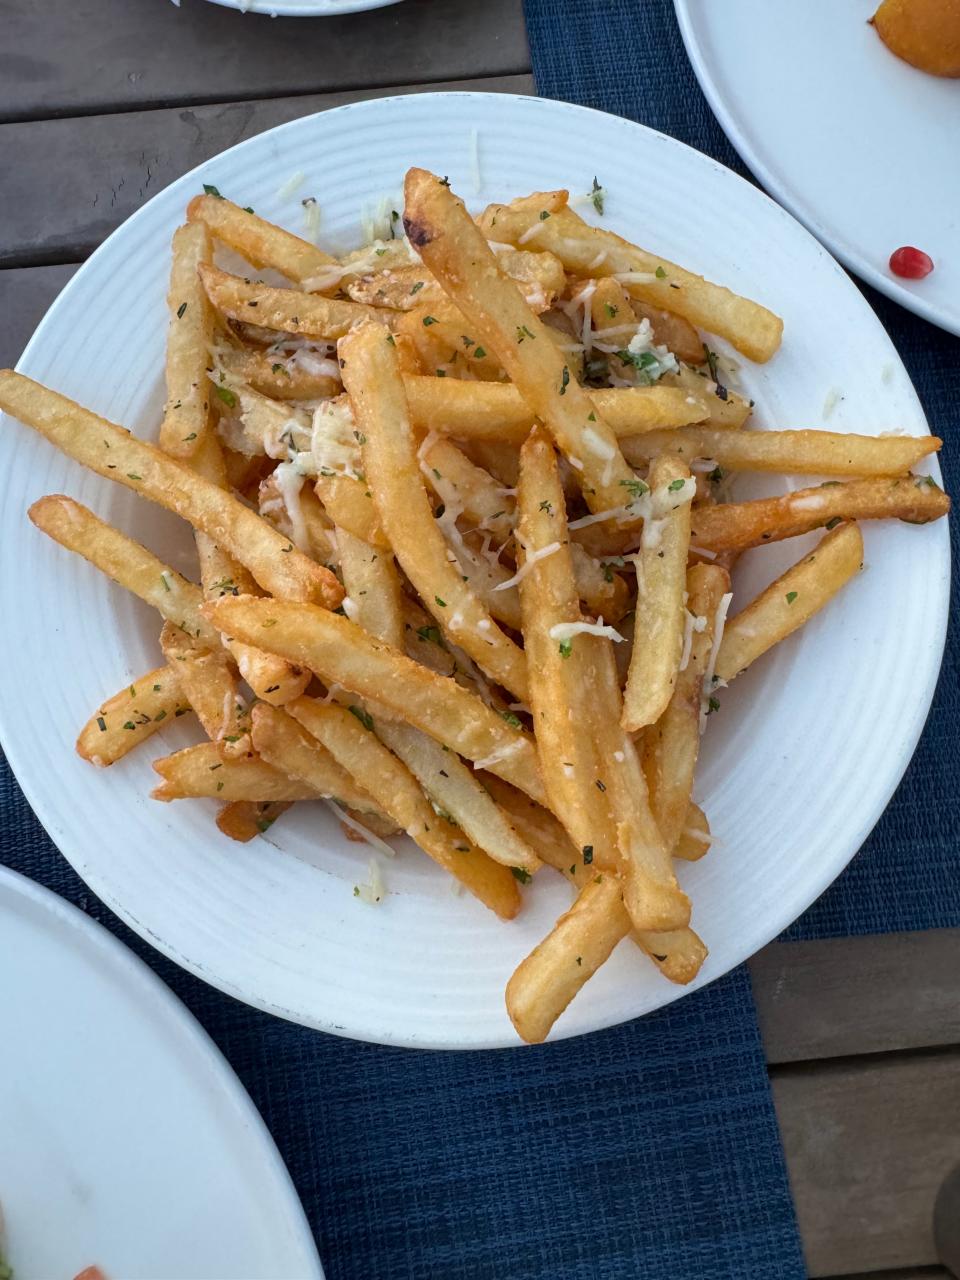 A plate of seasoned French fries served on a table, indicative of local cuisine for travelers